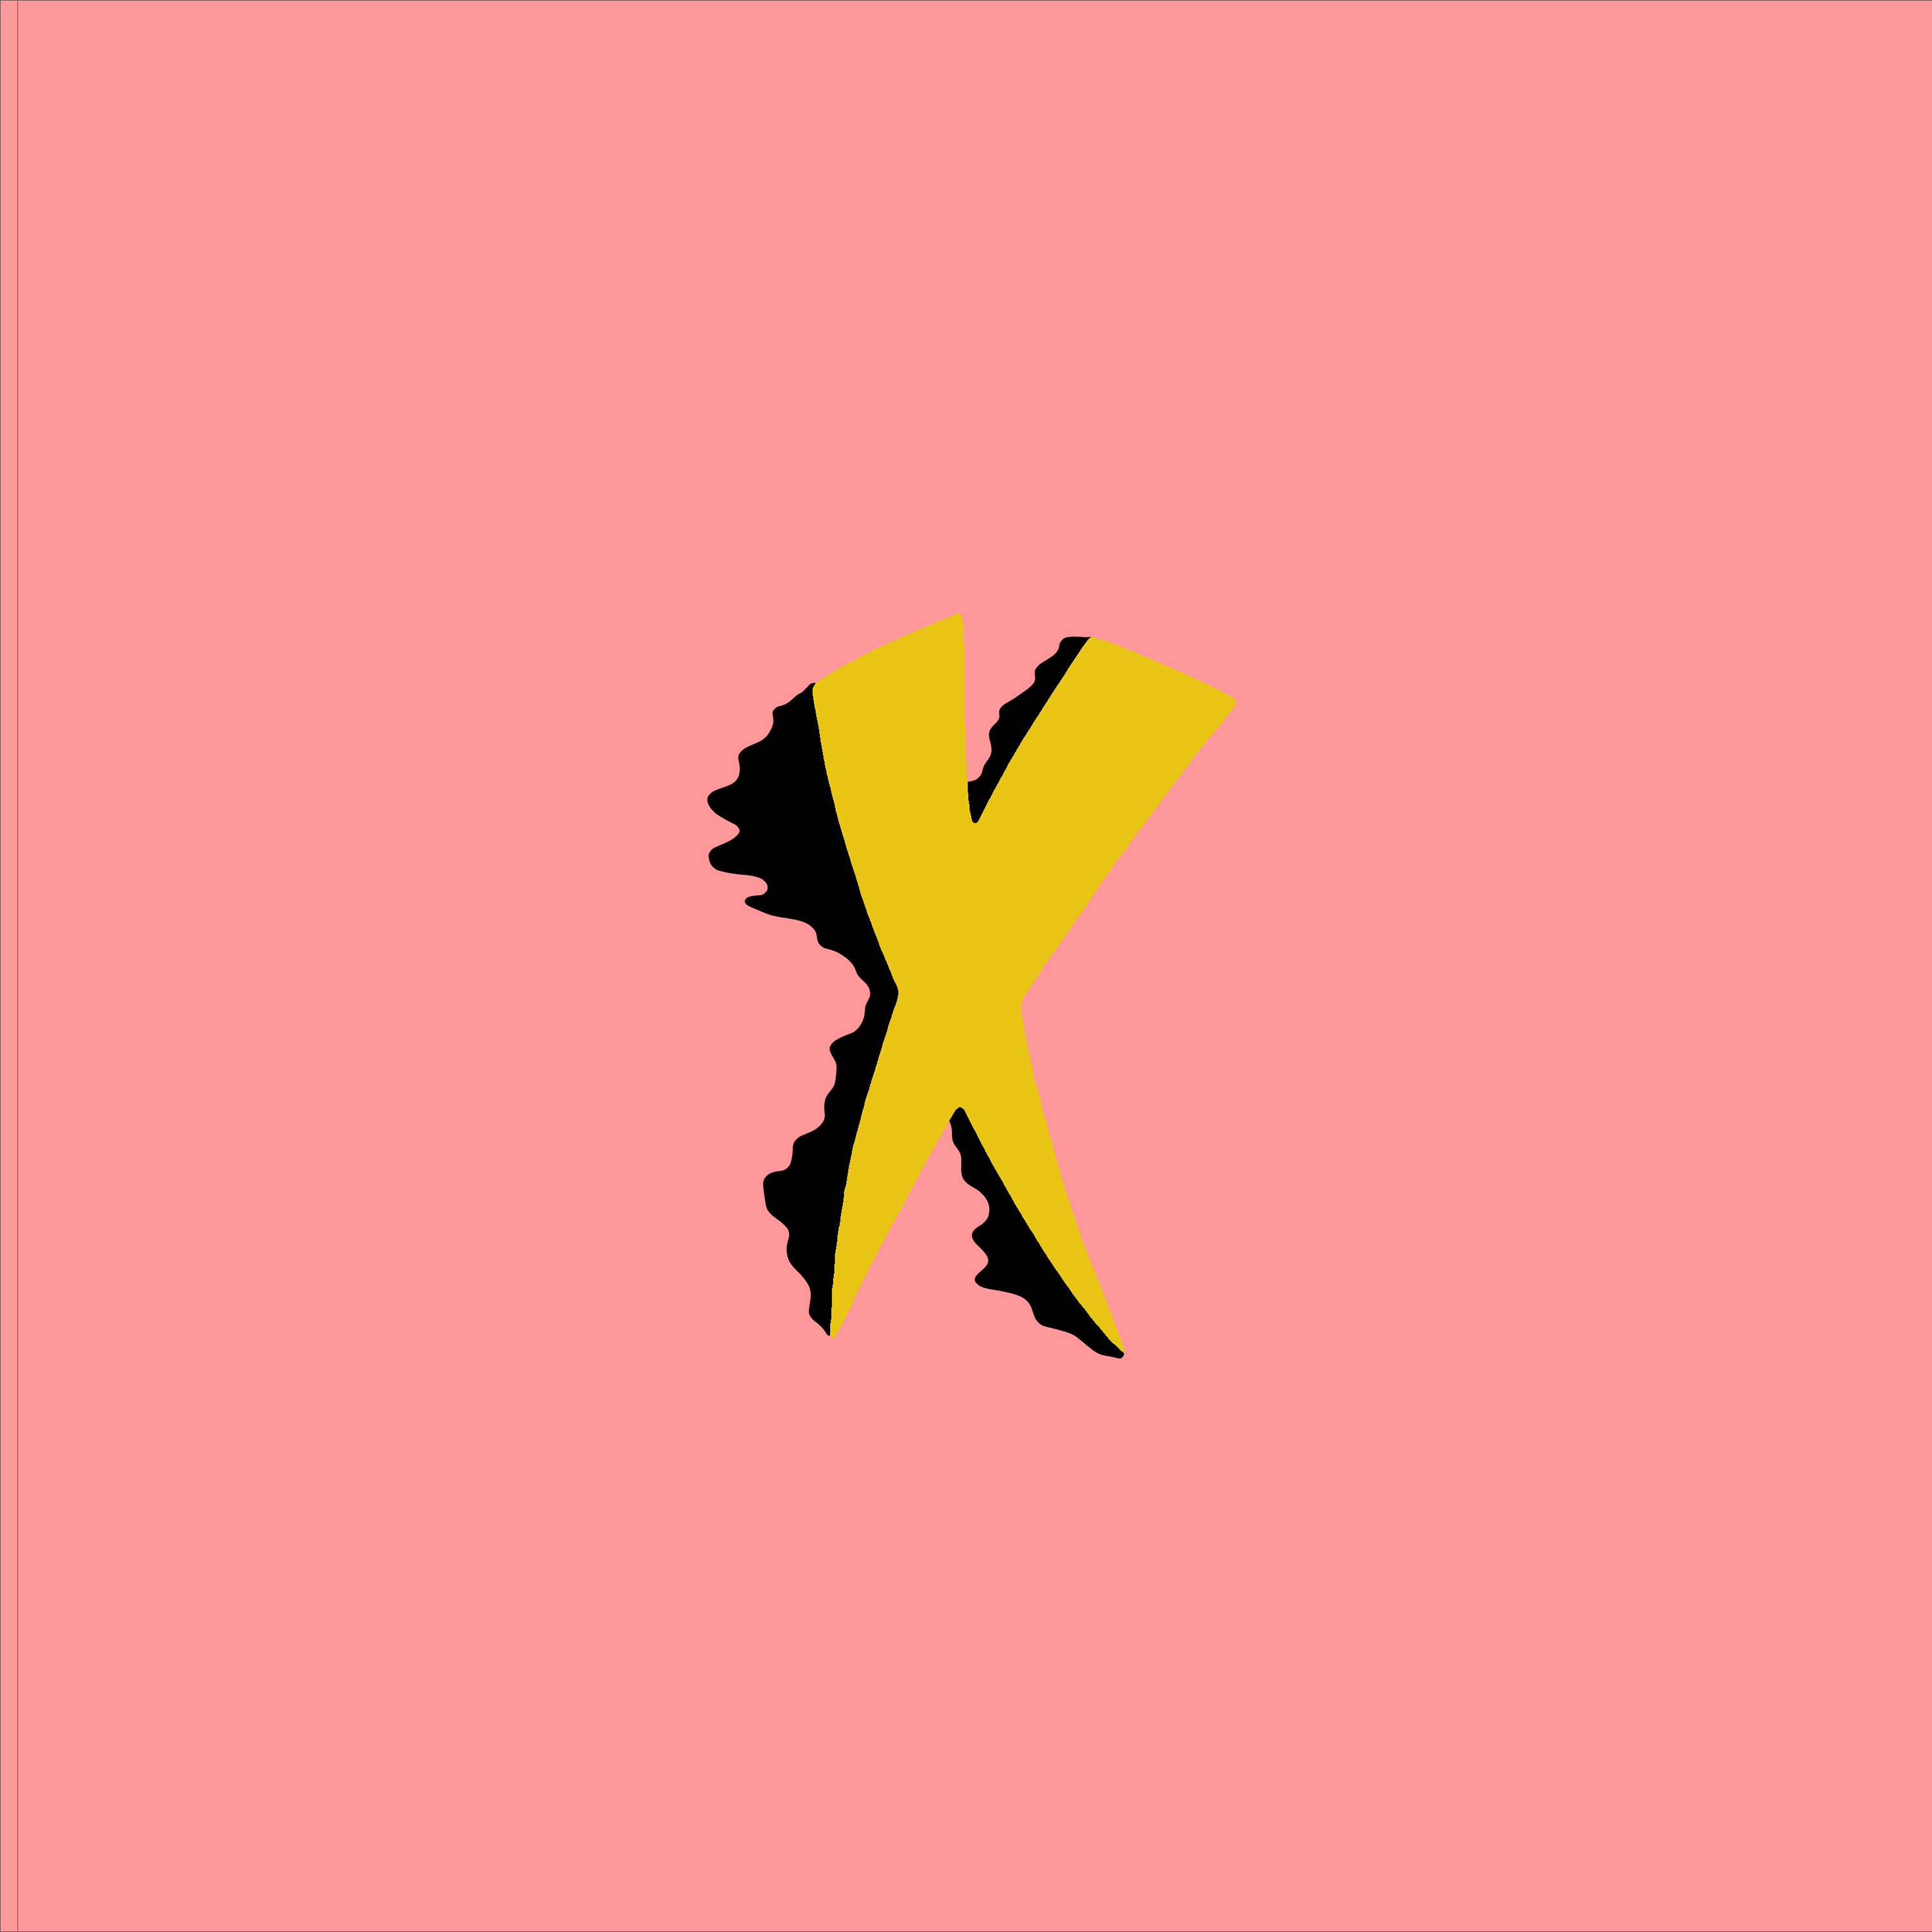 NxWorries New Album Thread “Daydreaming” [SINGLE OUT NOW] ktt2